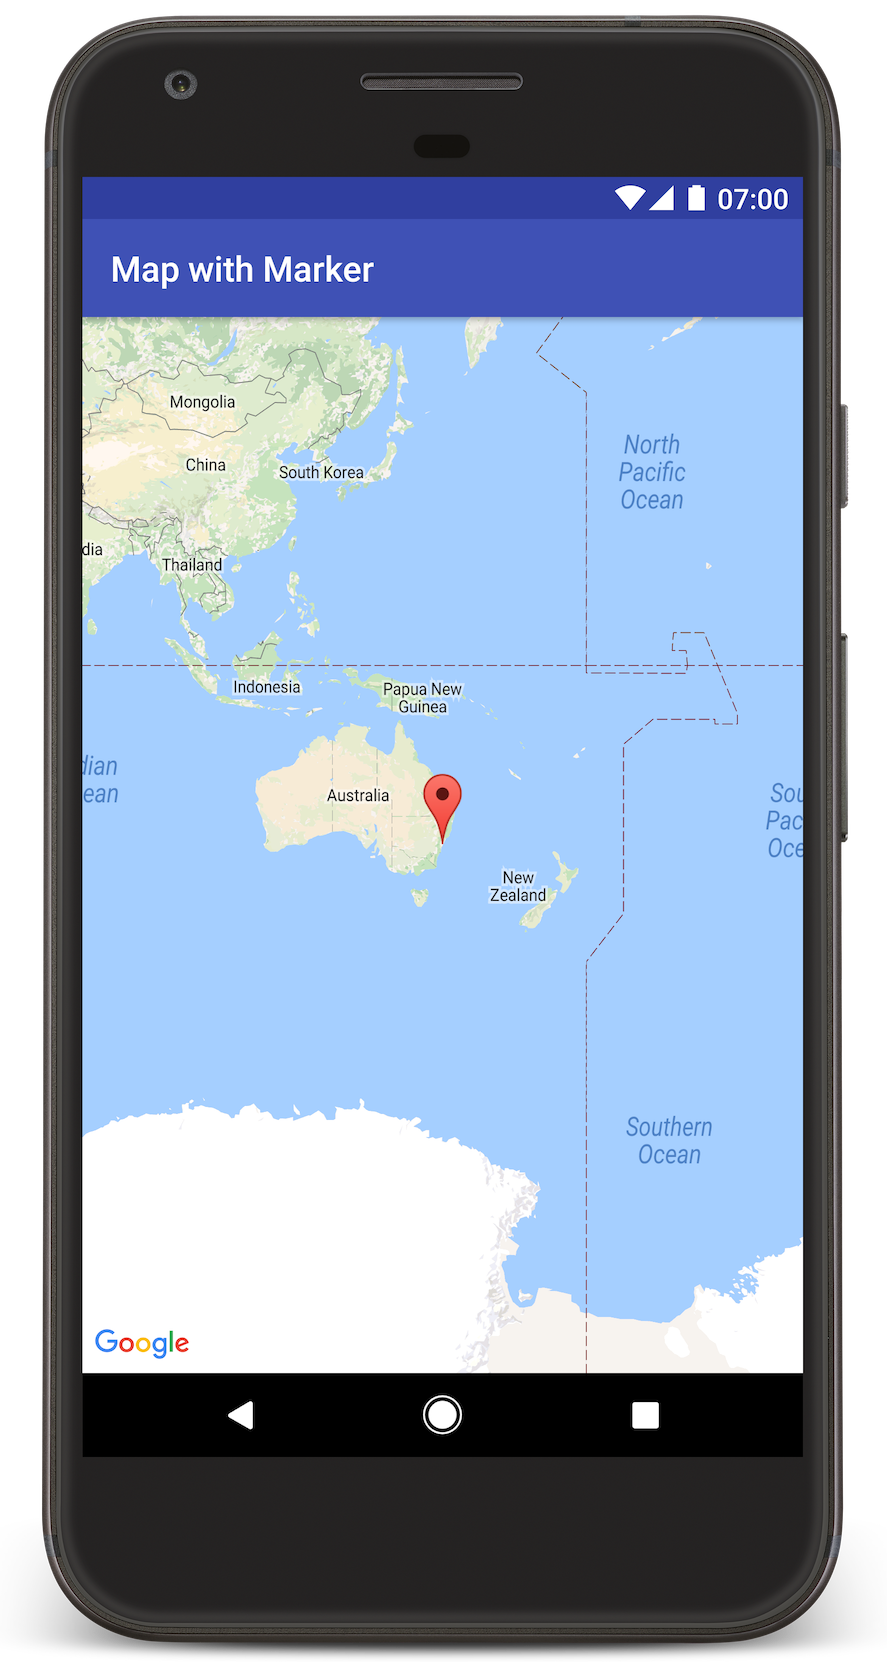 Adding a Map with a Marker | Maps SDK for Android | Google for Developers